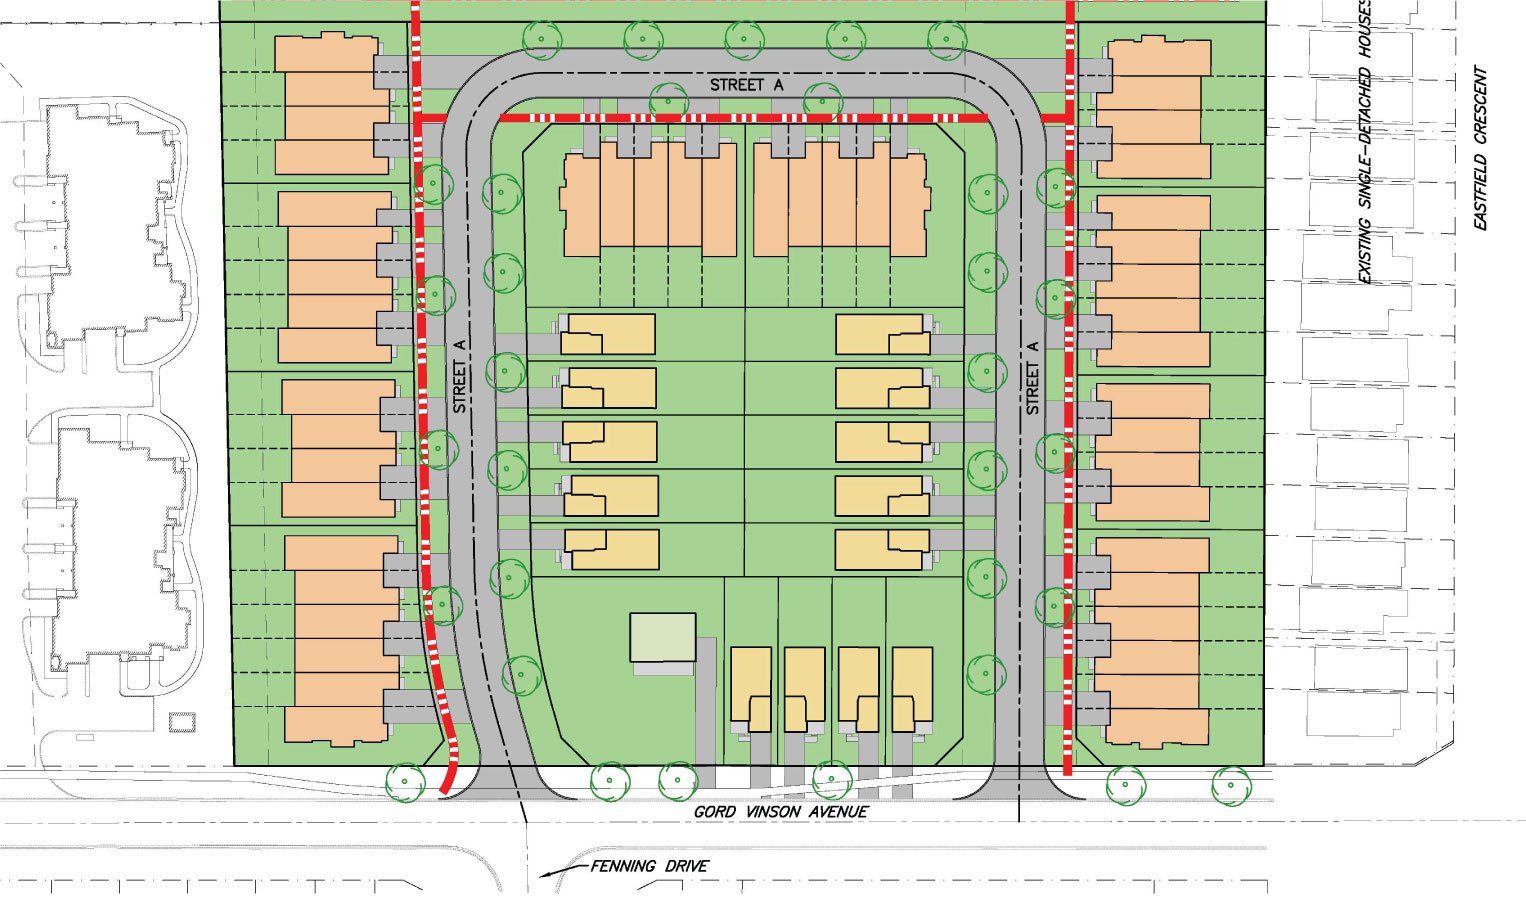 Map of proposed development at 1440 Gord Vinson Avenue